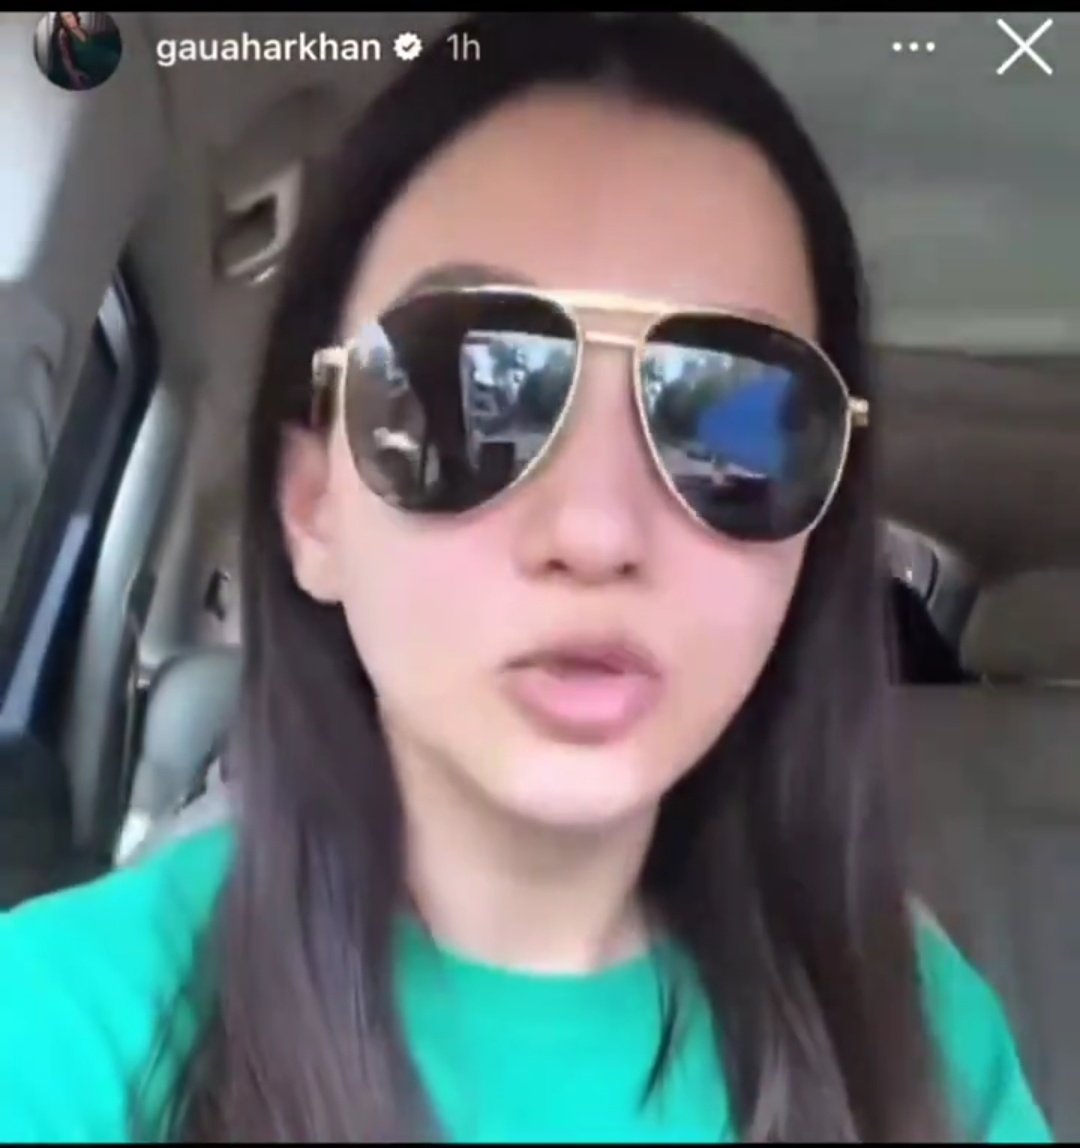 'I accidentally voted for Eknath Shinde's Shiv Sena instead of Uddhav Thackrey's Shiv Sena, Election commission should announce repolling at my polling station.' Claims Actress Gauhar Khan.